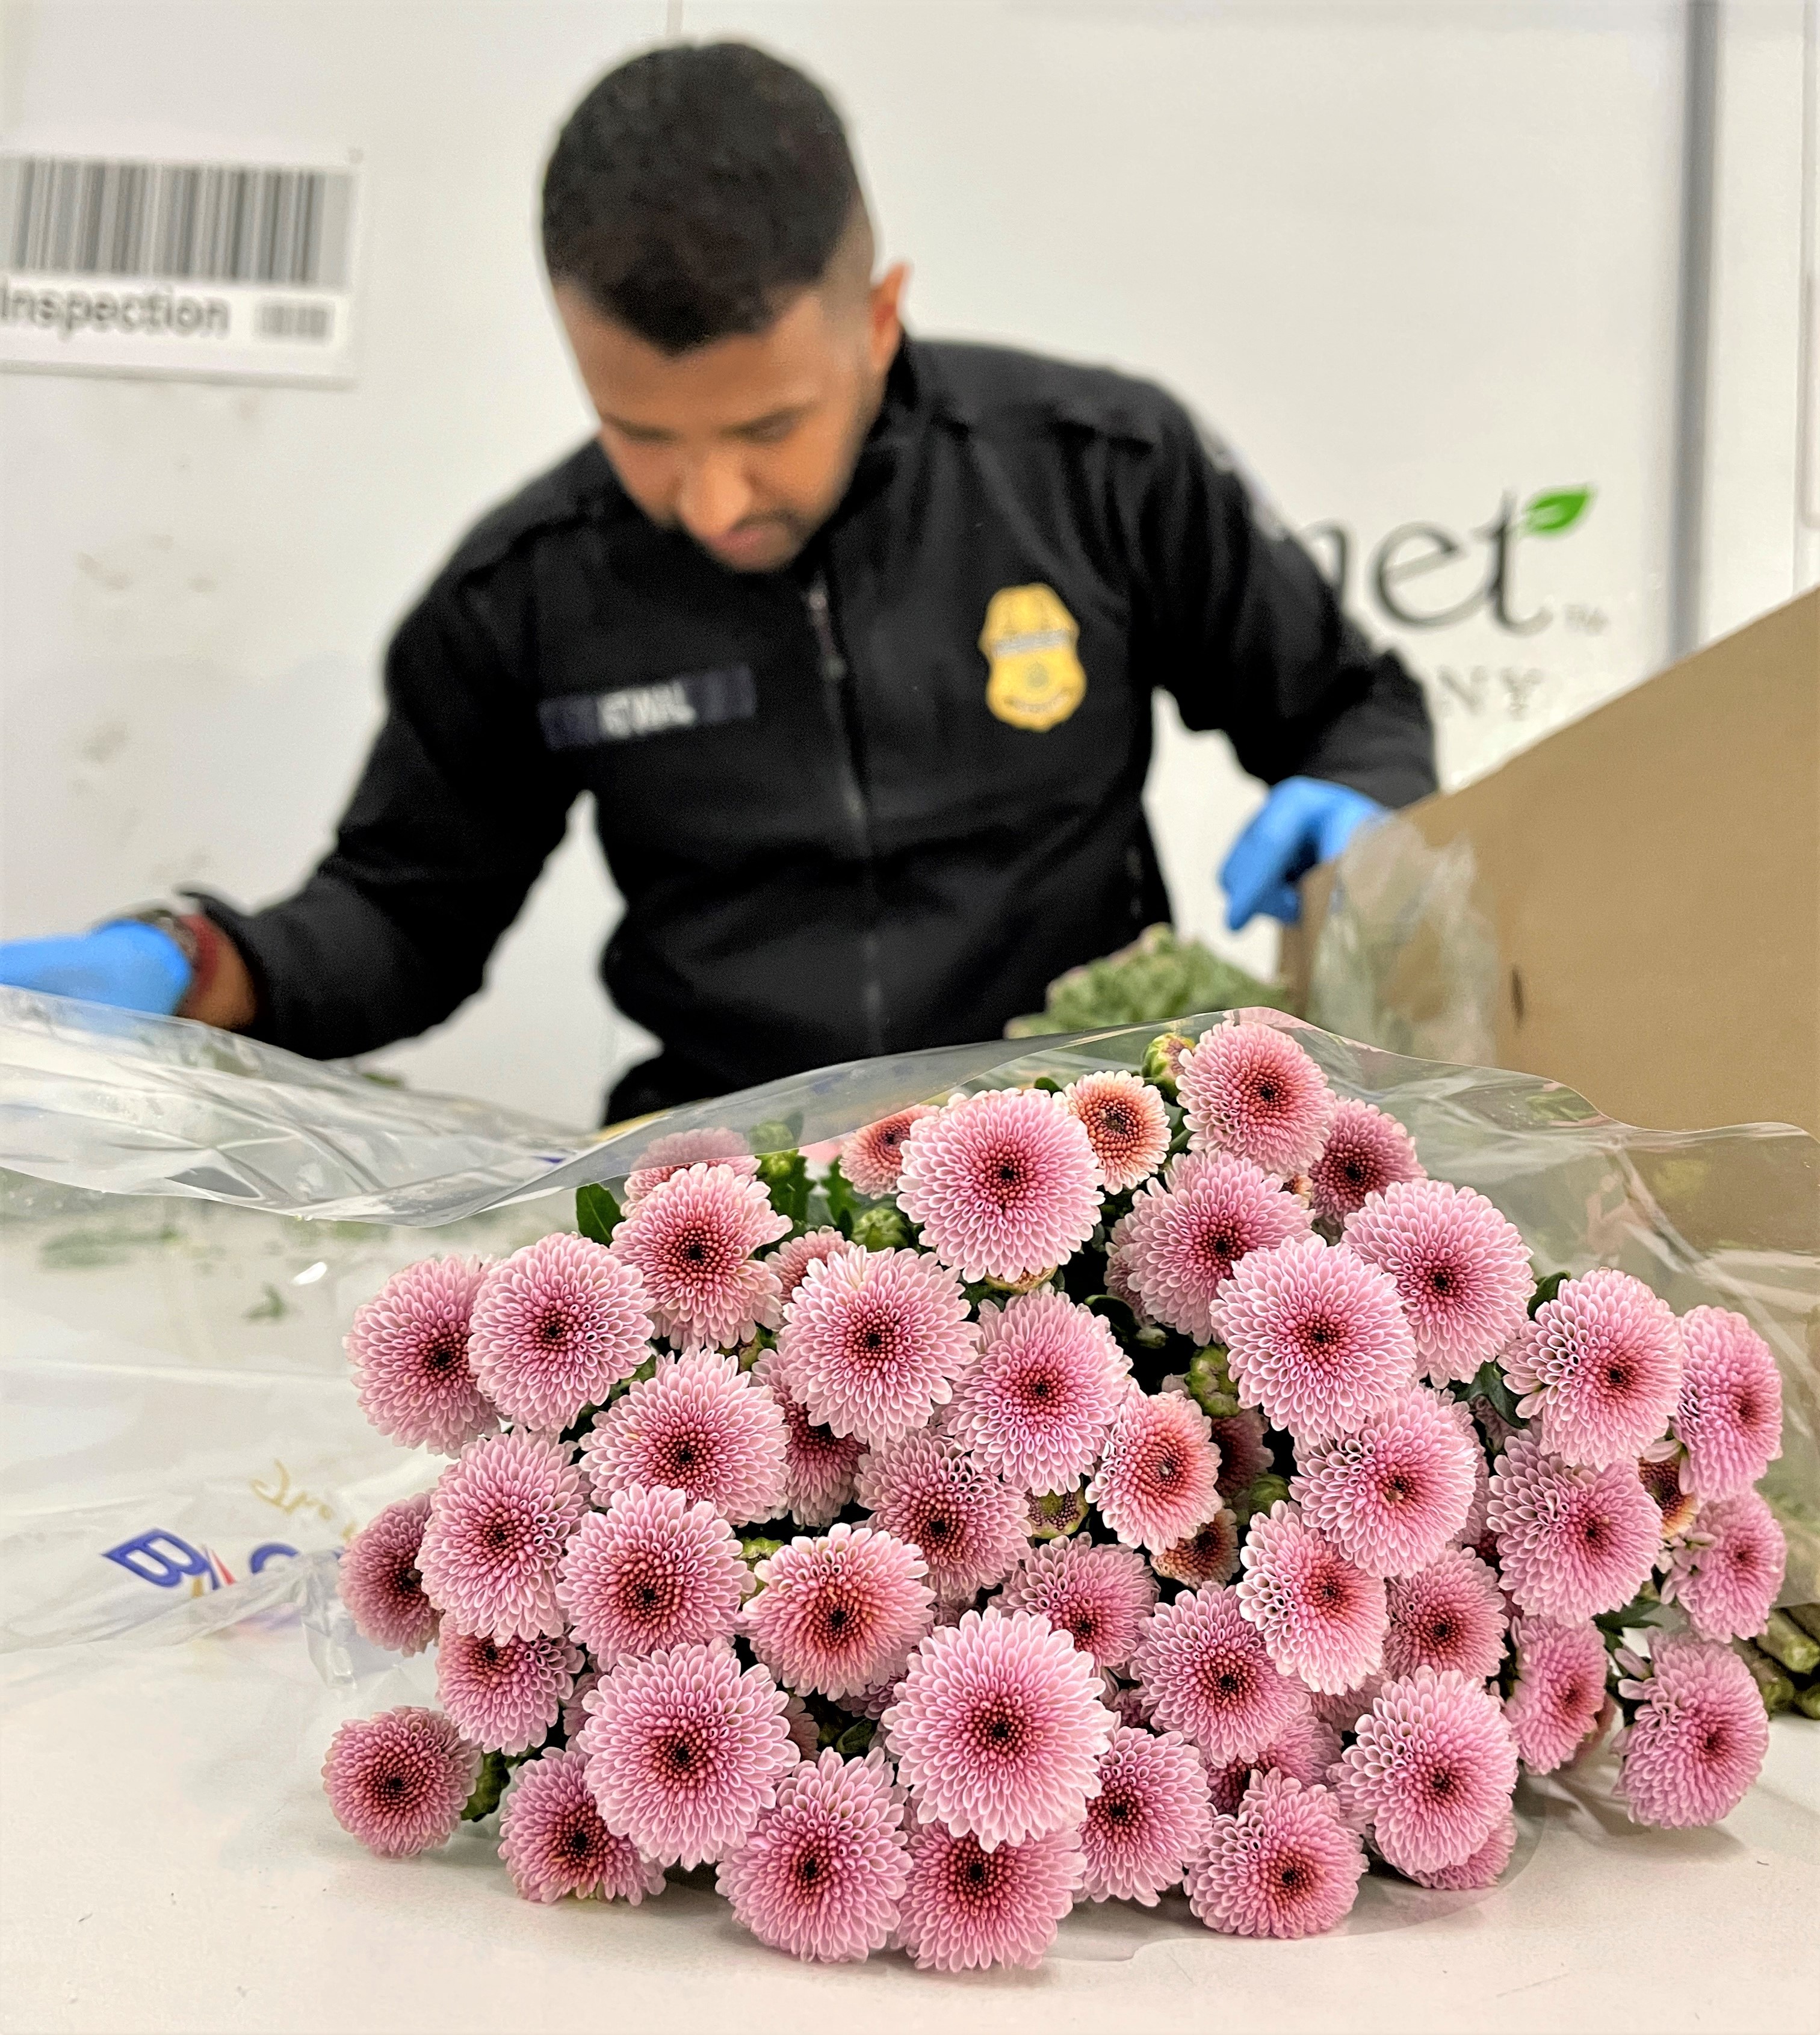 LAX Flowers Inspection 13